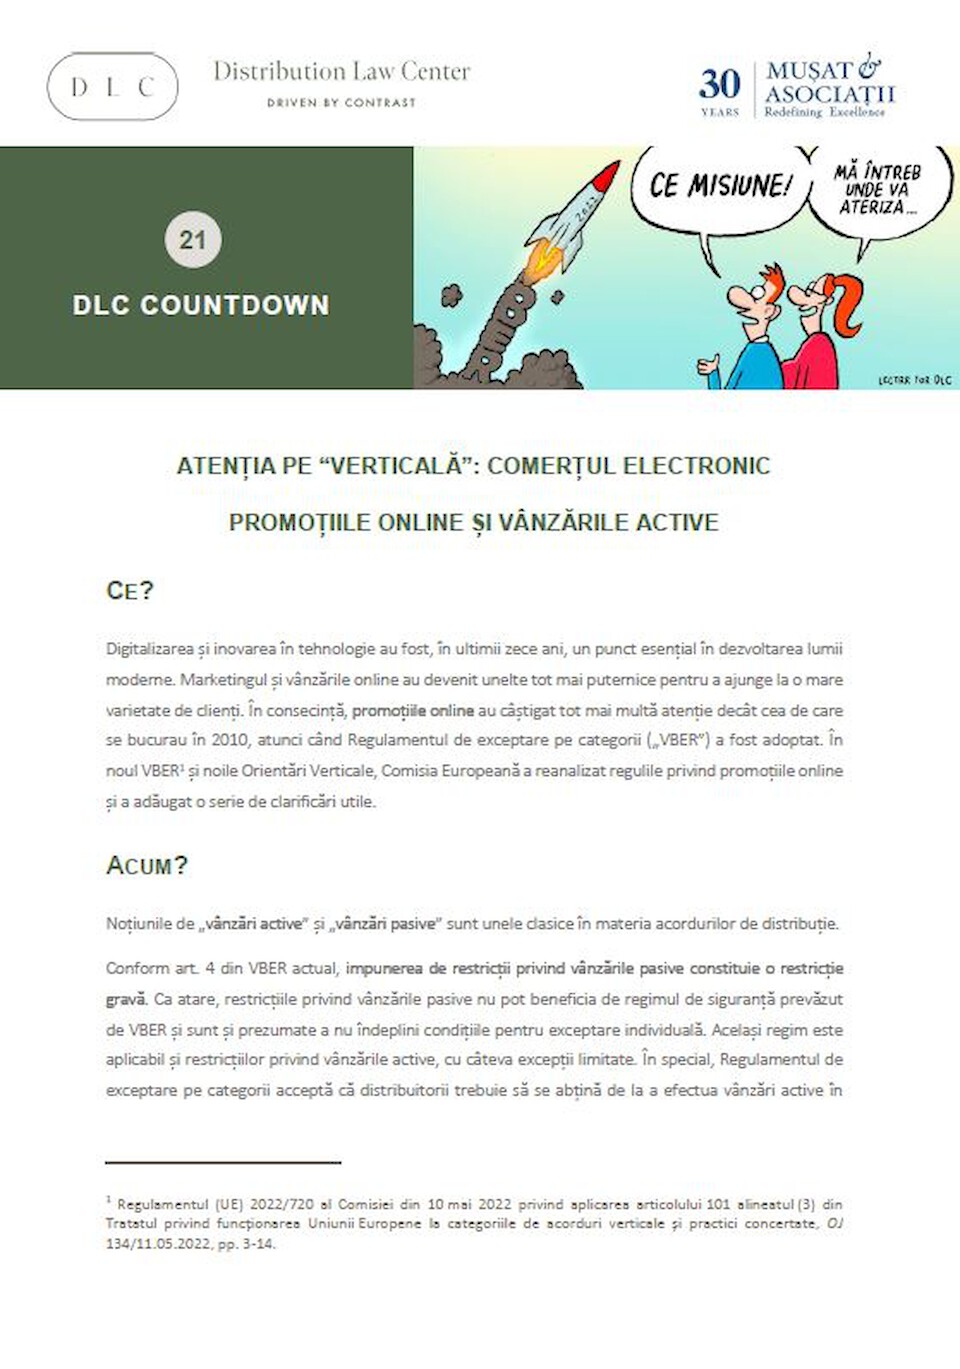 Distribution Law Center Countdown XXI - E-commerce (Online promotions and active sales)